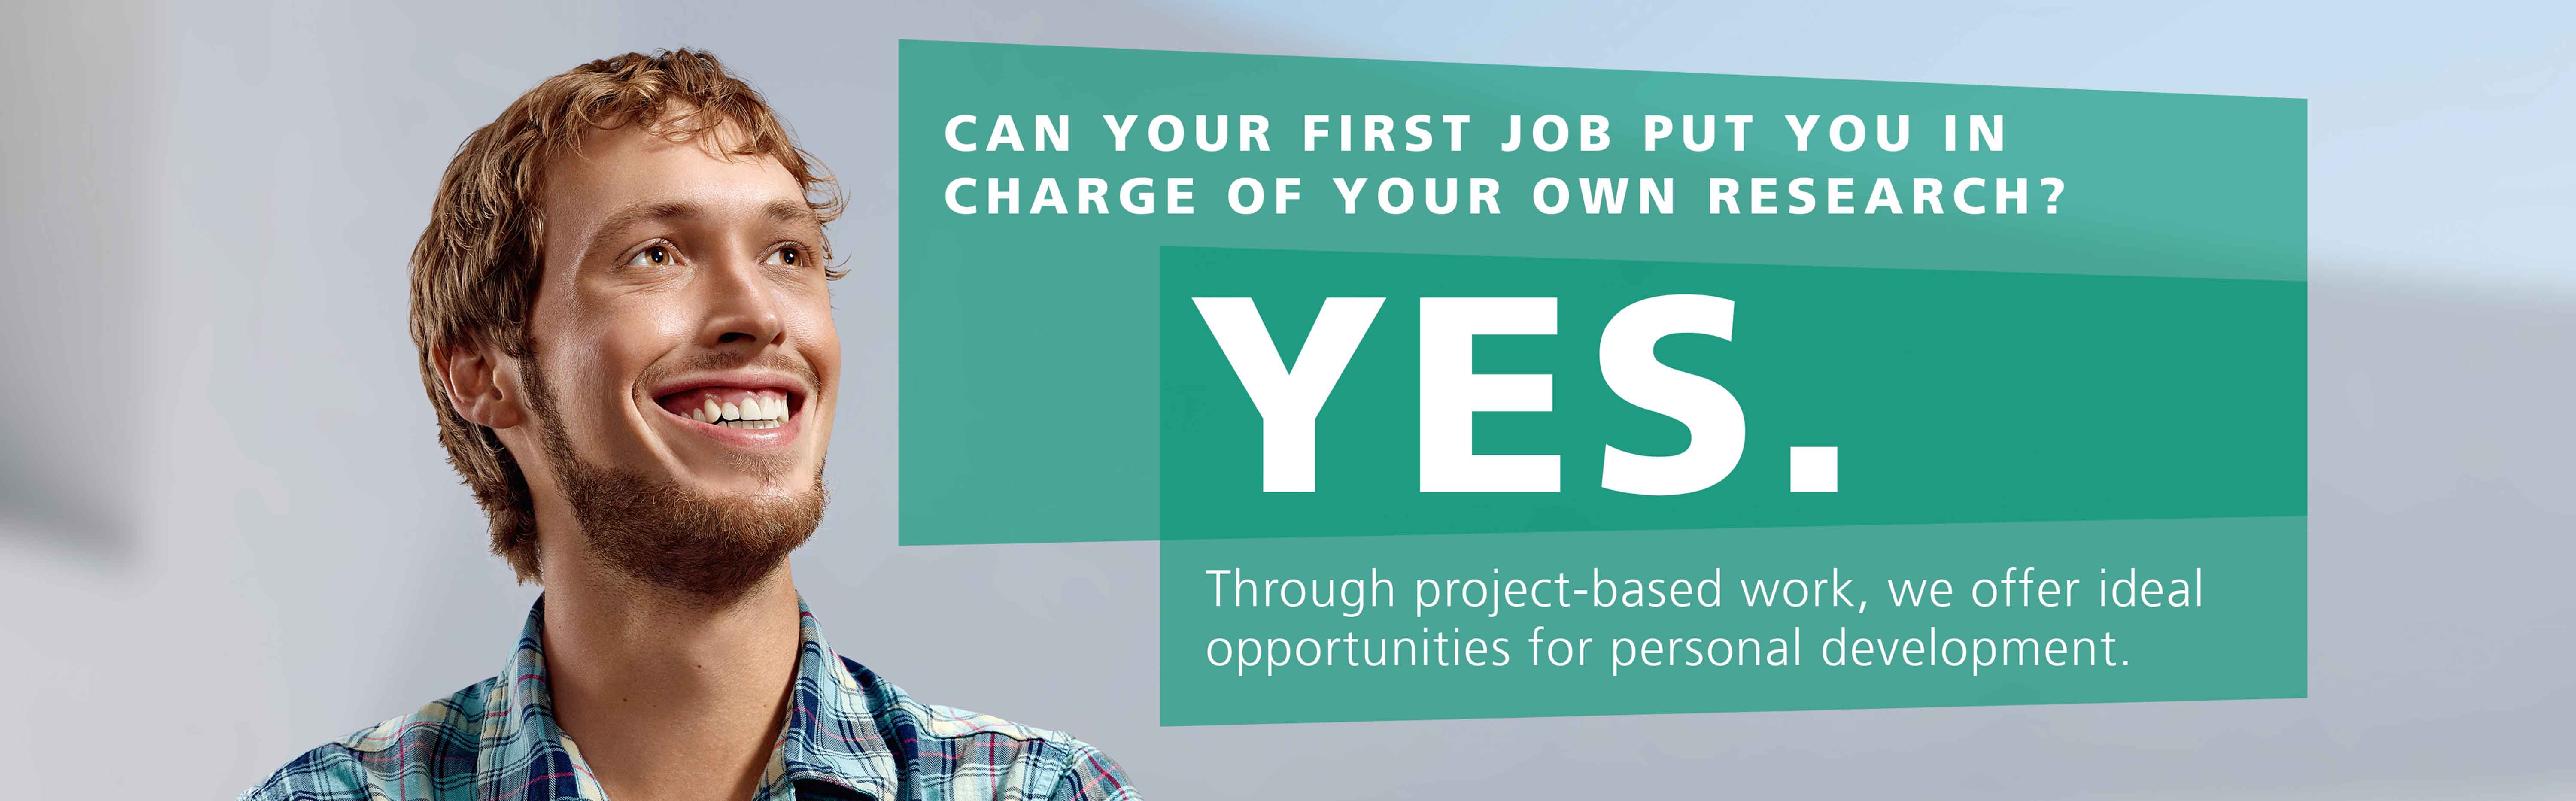 Here you can see our slogan: Can your first job put you in charge of your own research? YES!